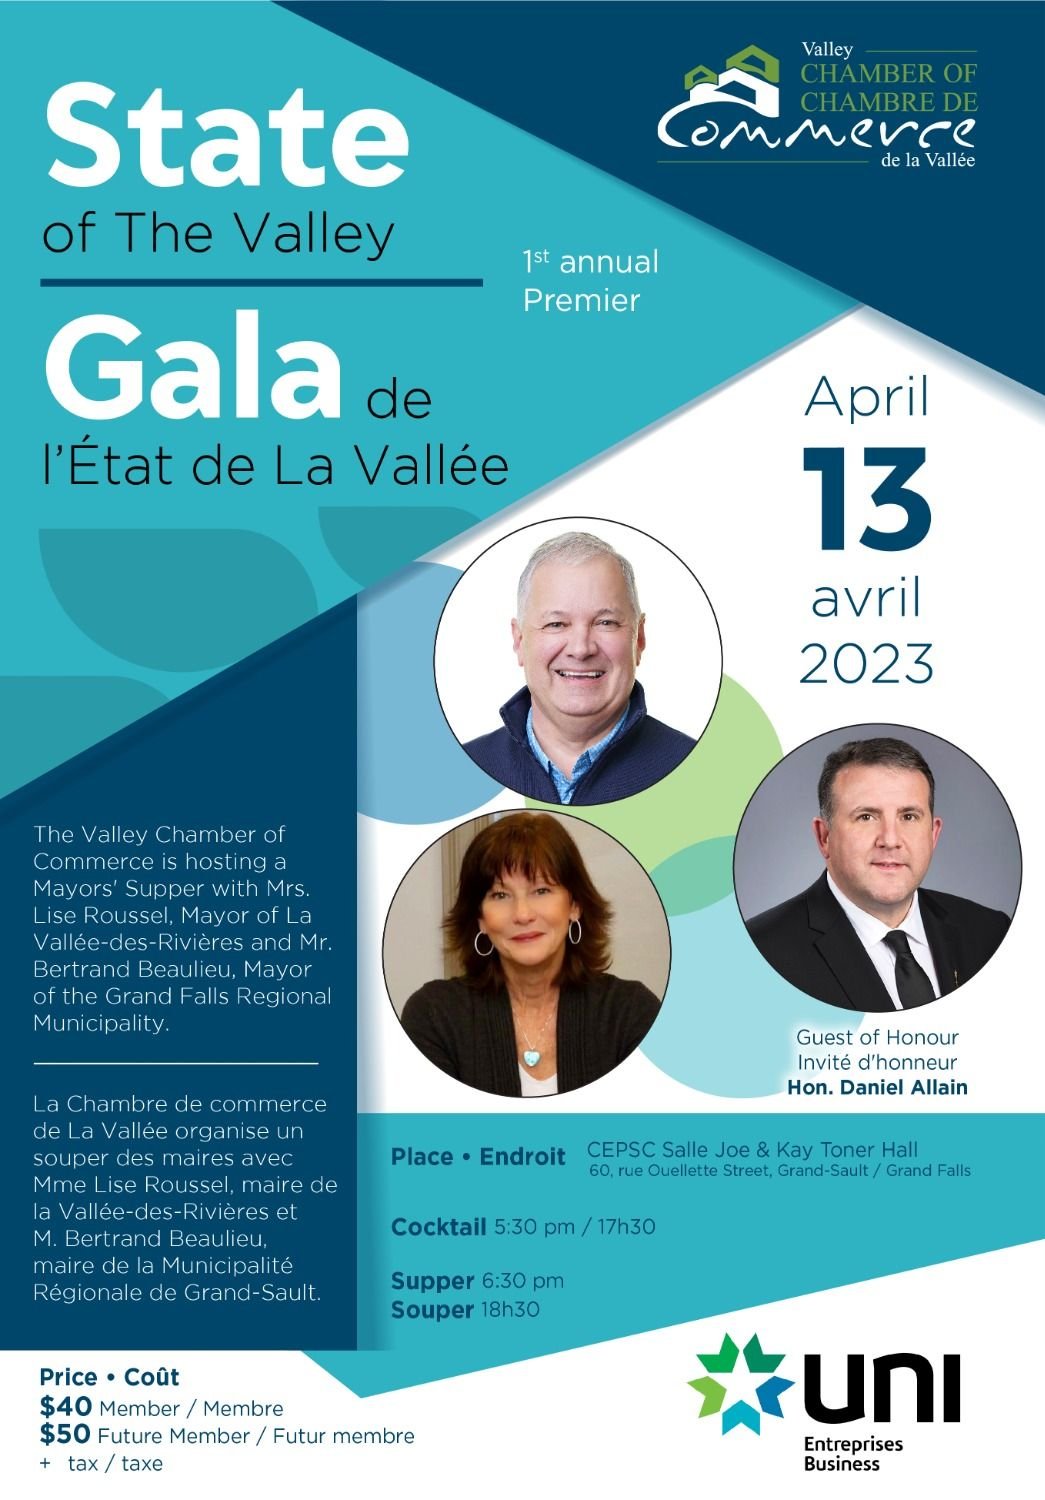 State of The Valley Gala